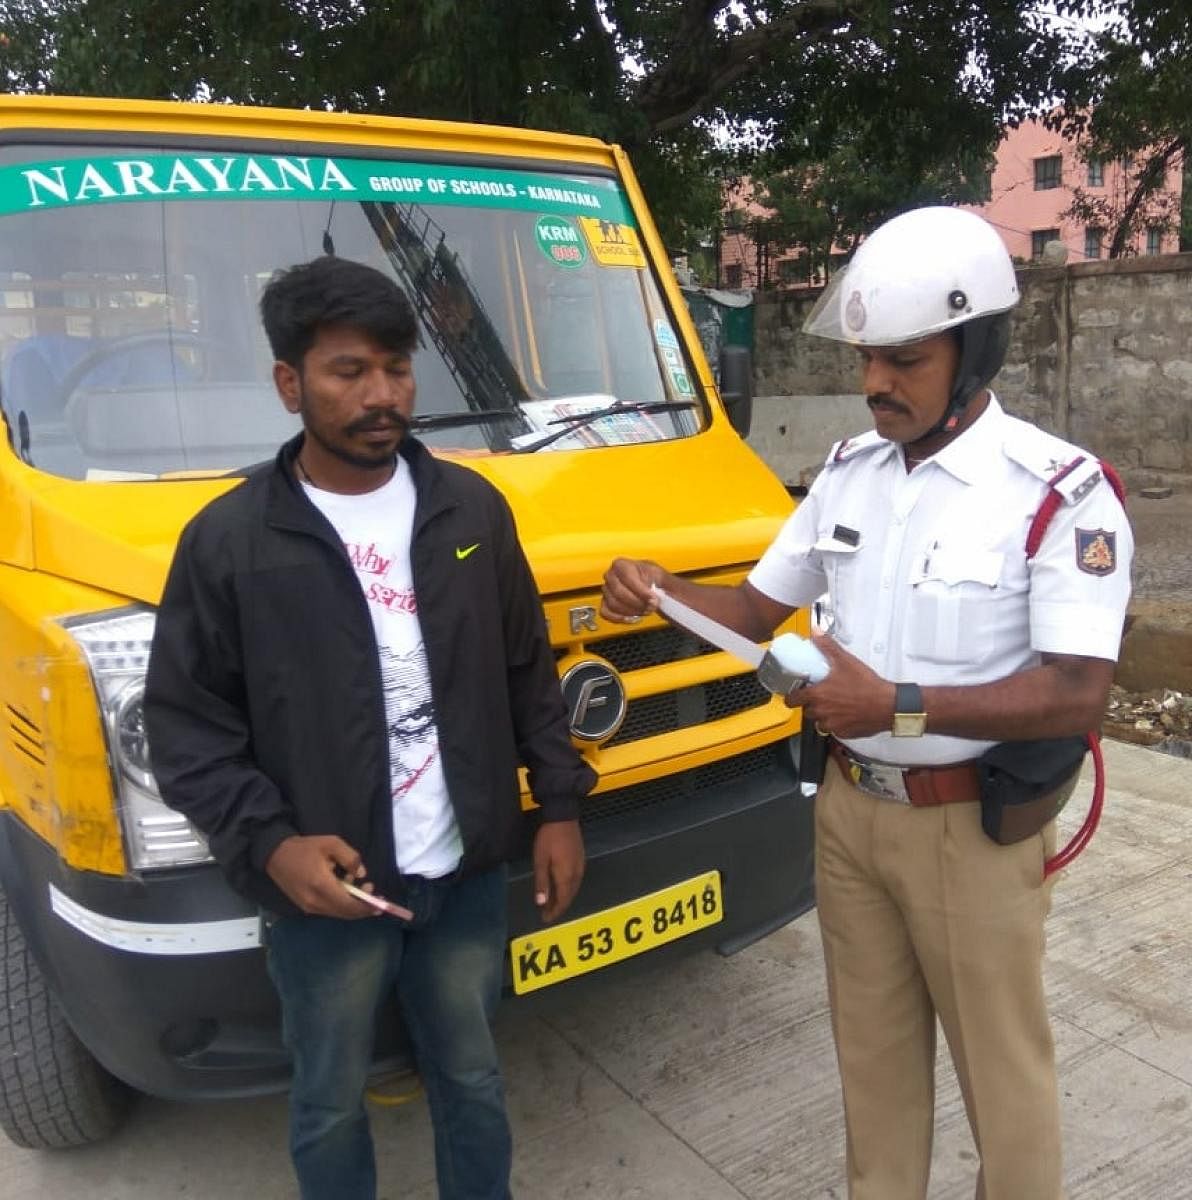 A school van driver booked by a traffic police officer on Monday.